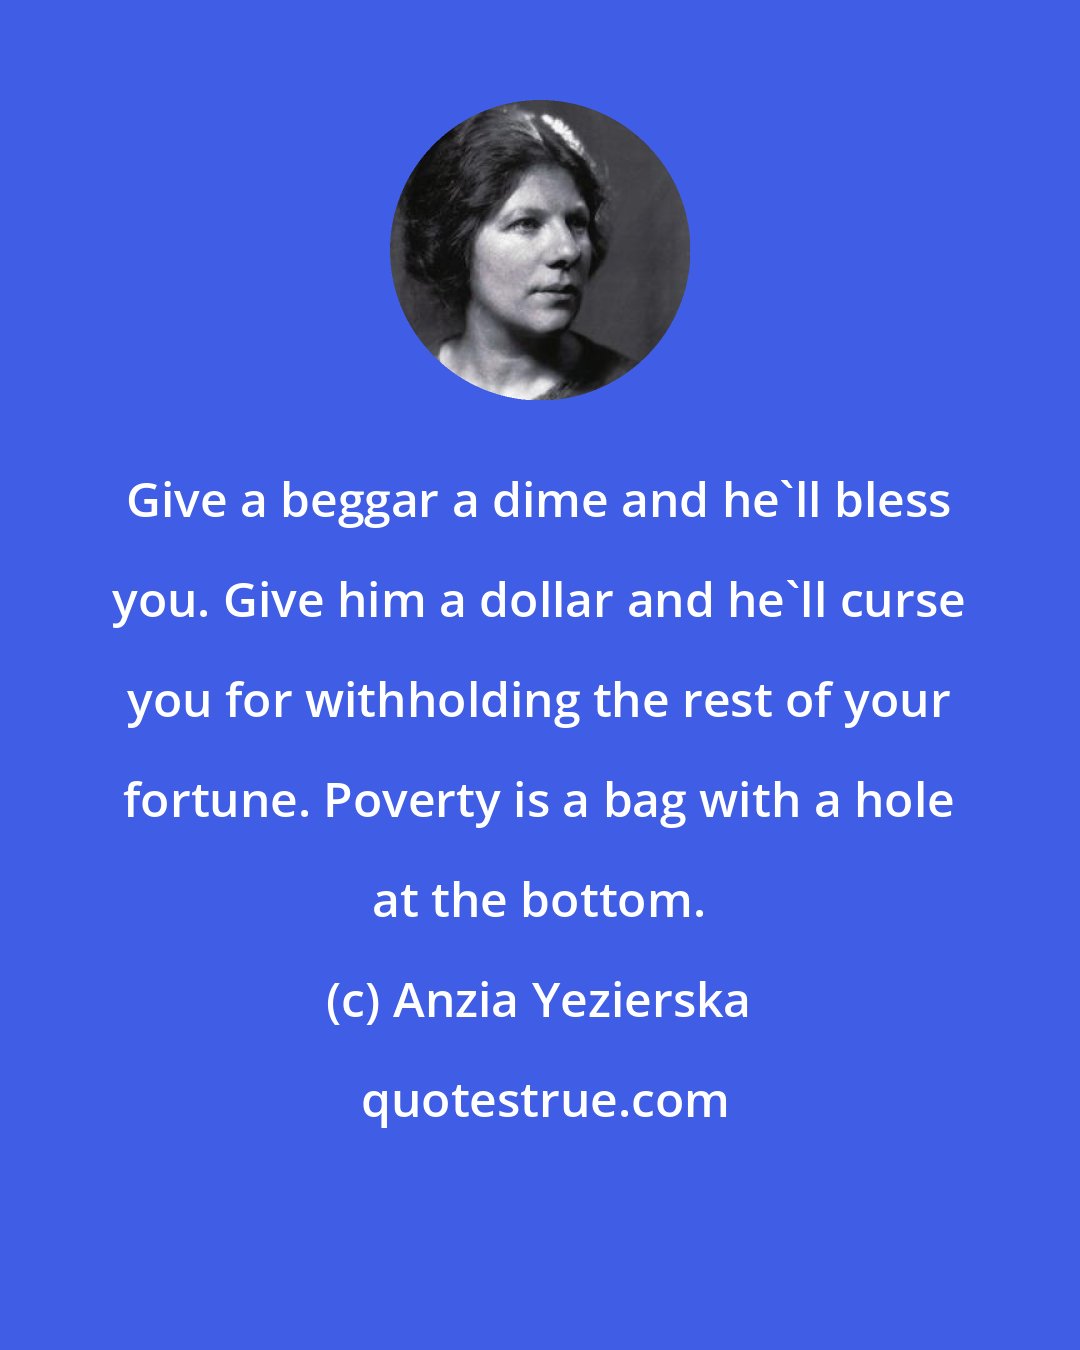 Anzia Yezierska: Give a beggar a dime and he'll bless you. Give him a dollar and he'll curse you for withholding the rest of your fortune. Poverty is a bag with a hole at the bottom.